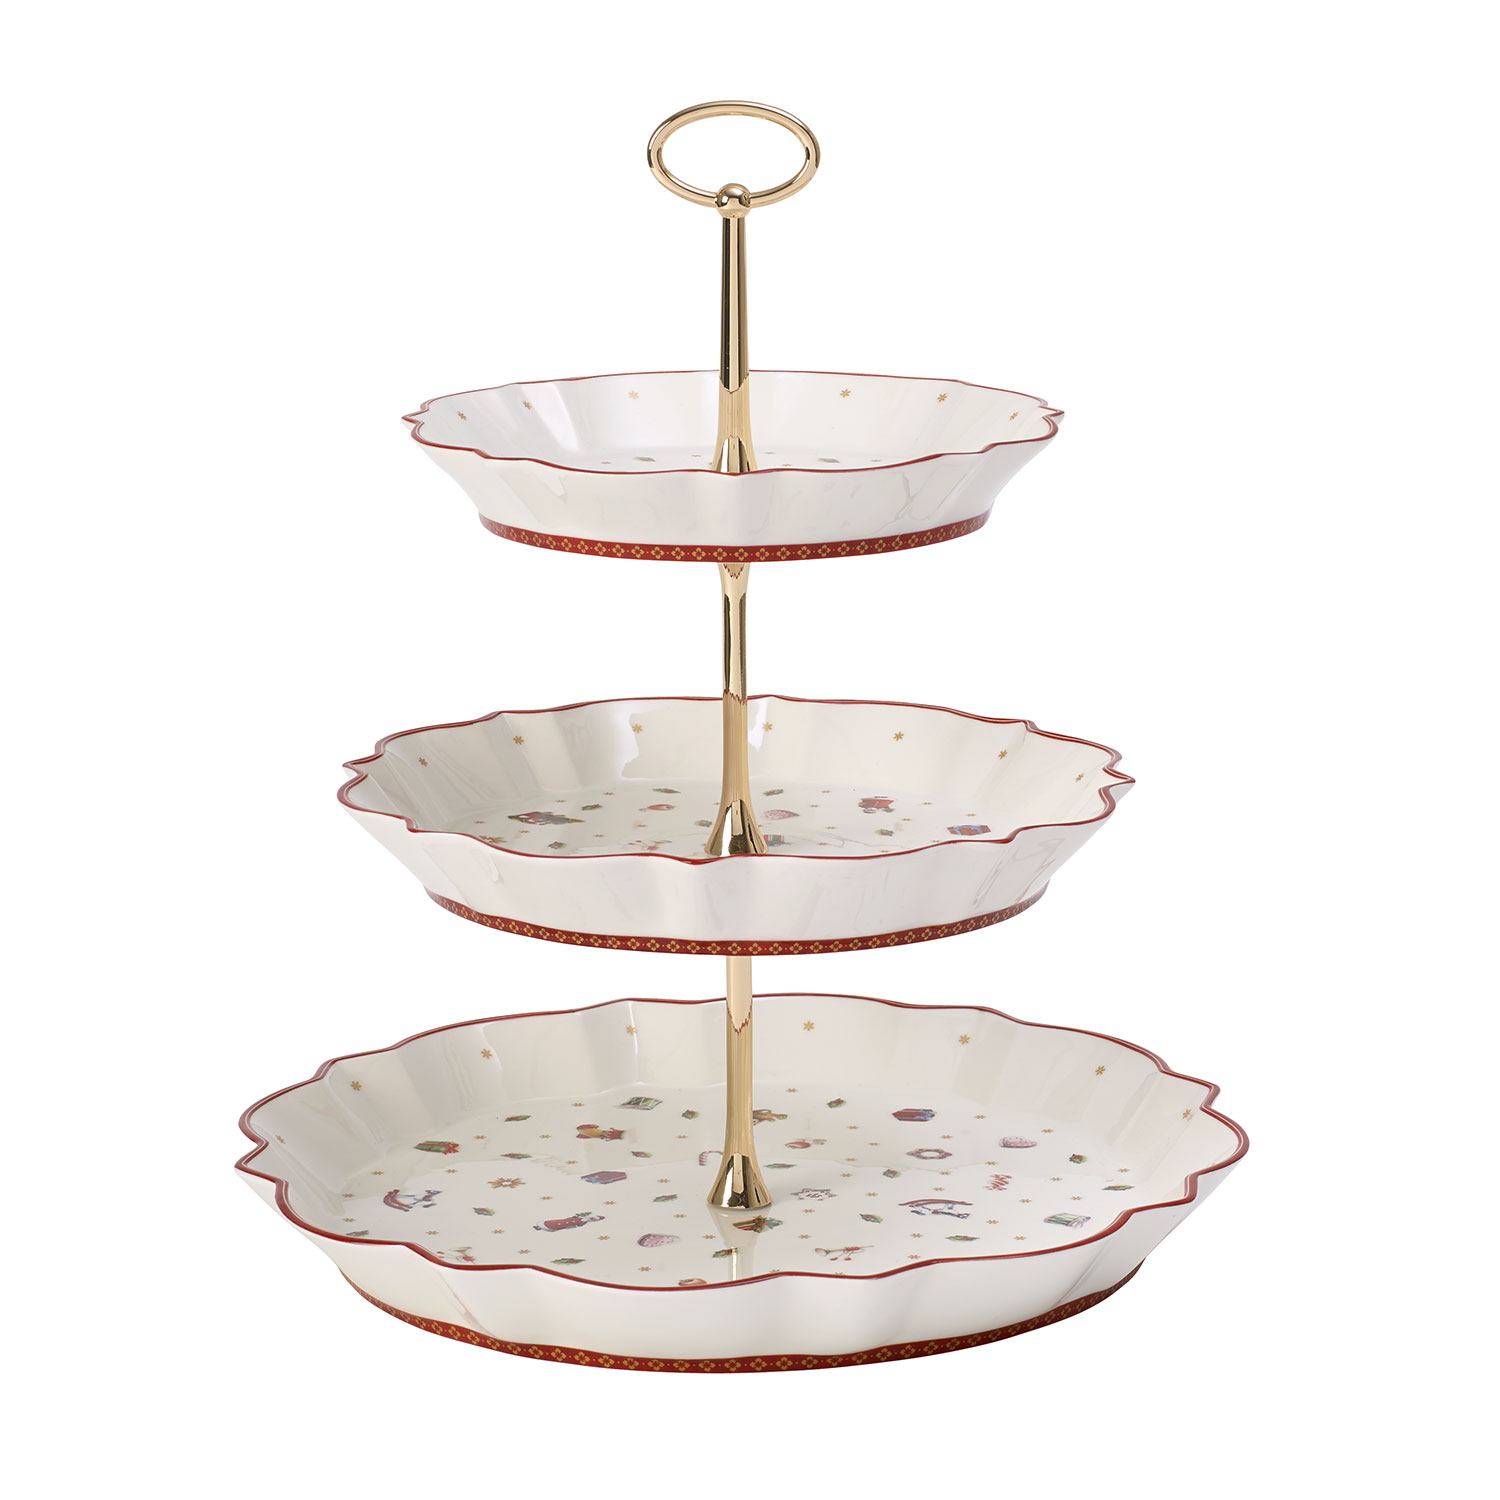 Toy's Delight Cake Stand, Large Villeroy & Boch